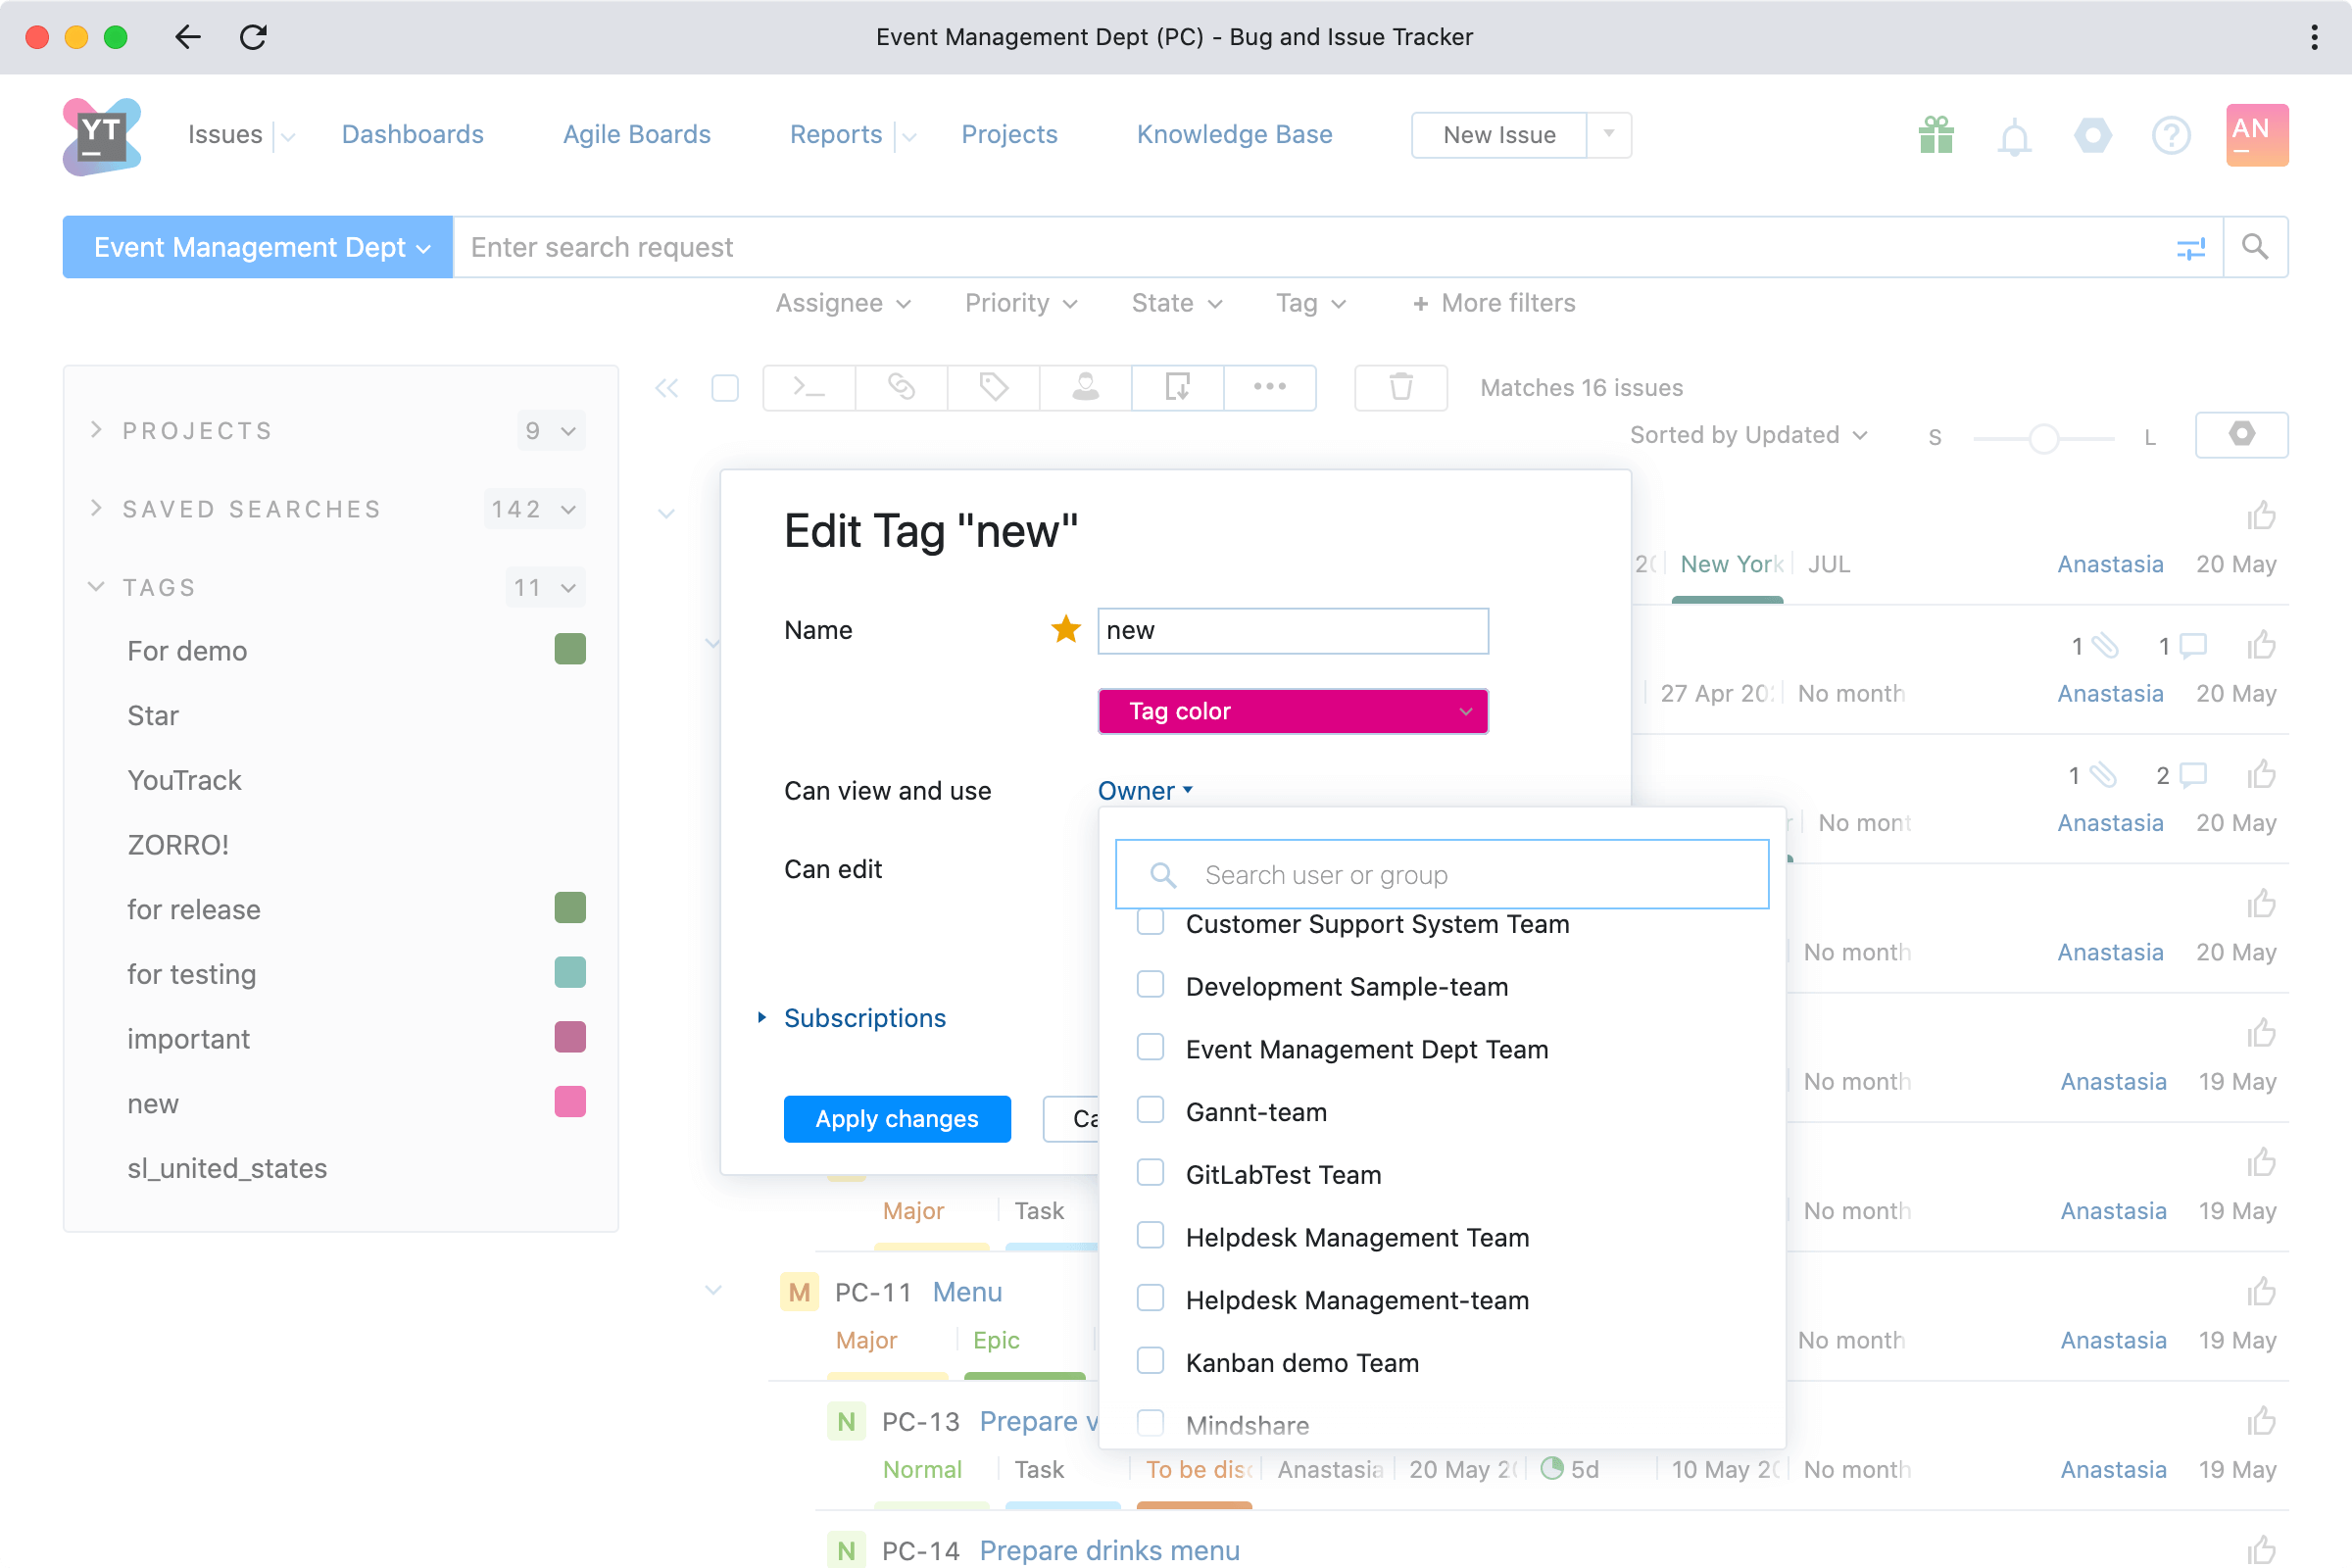 Fine-grained sharing options for tags, saved searches, Agile boards, and reports